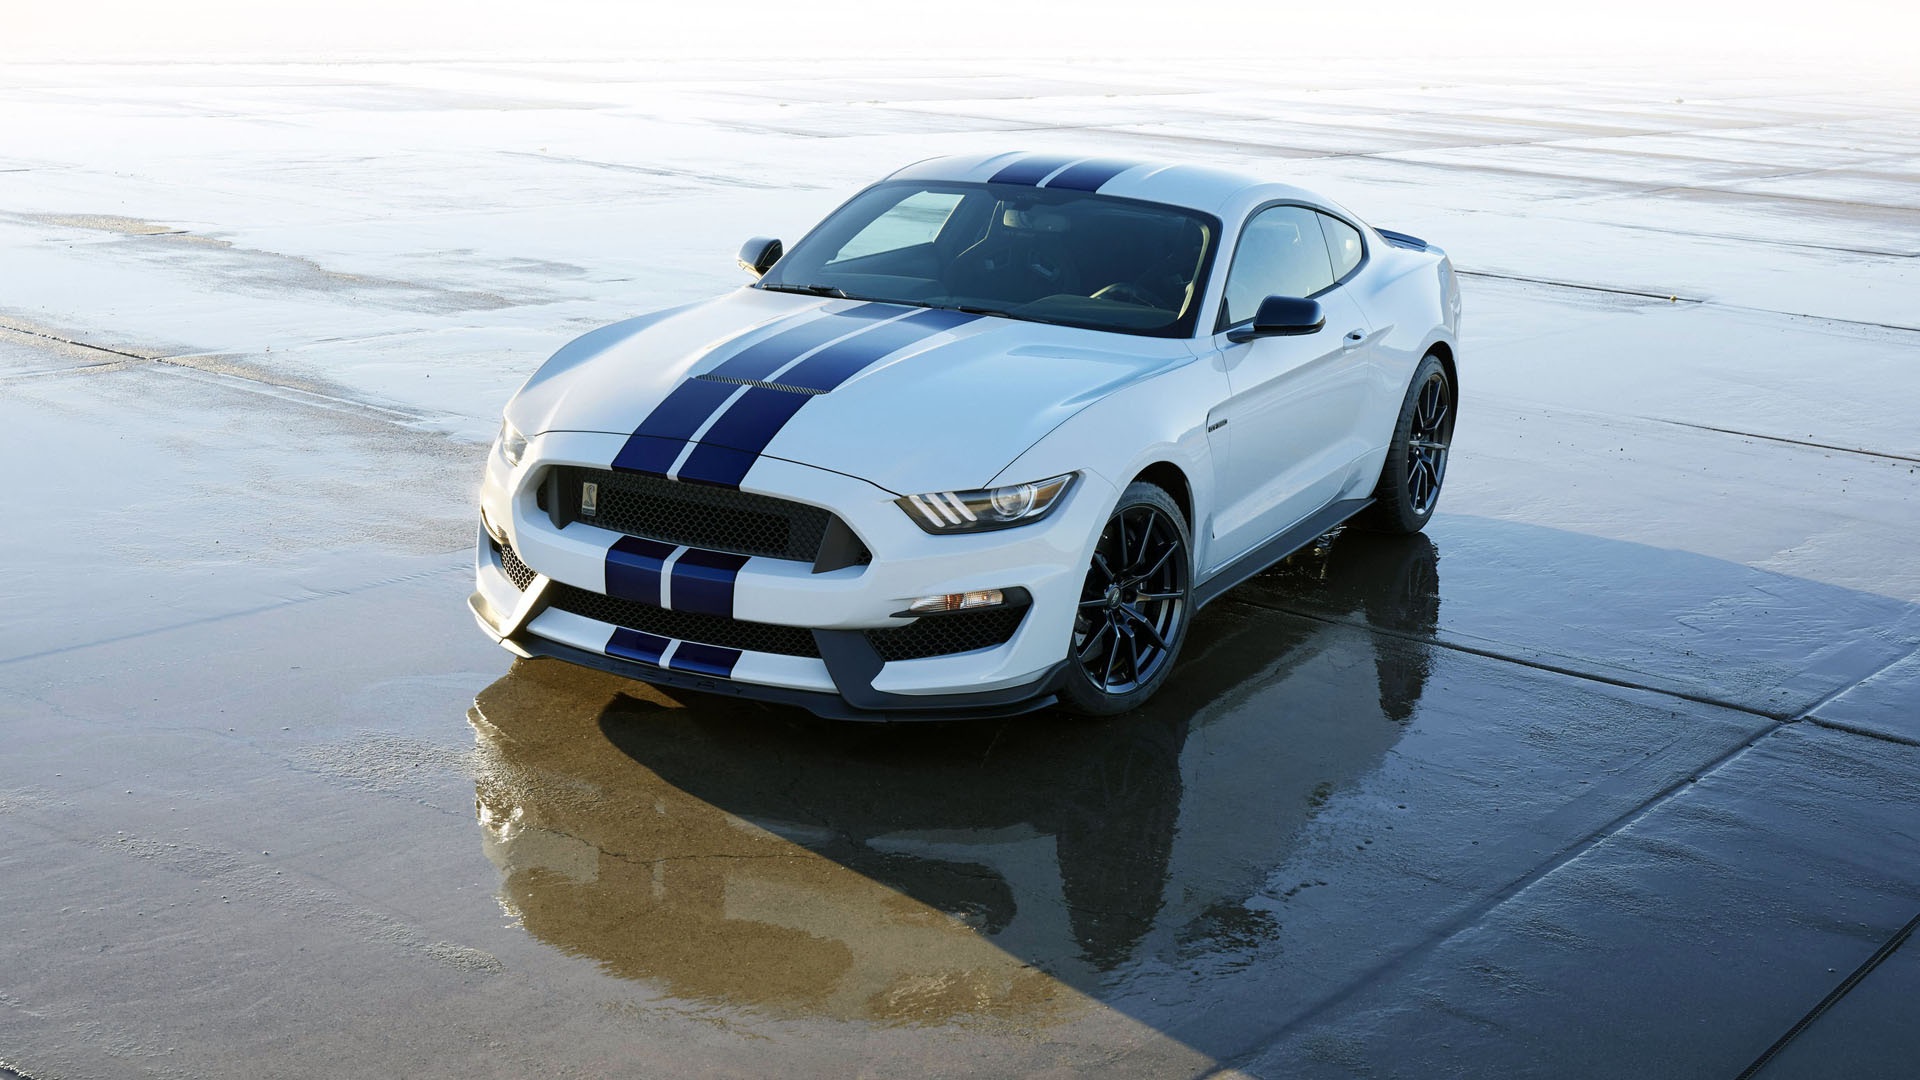 Car Ford Ford Mustang Shelby Gt350 Muscle Car Vehicle White Car 1920x1080